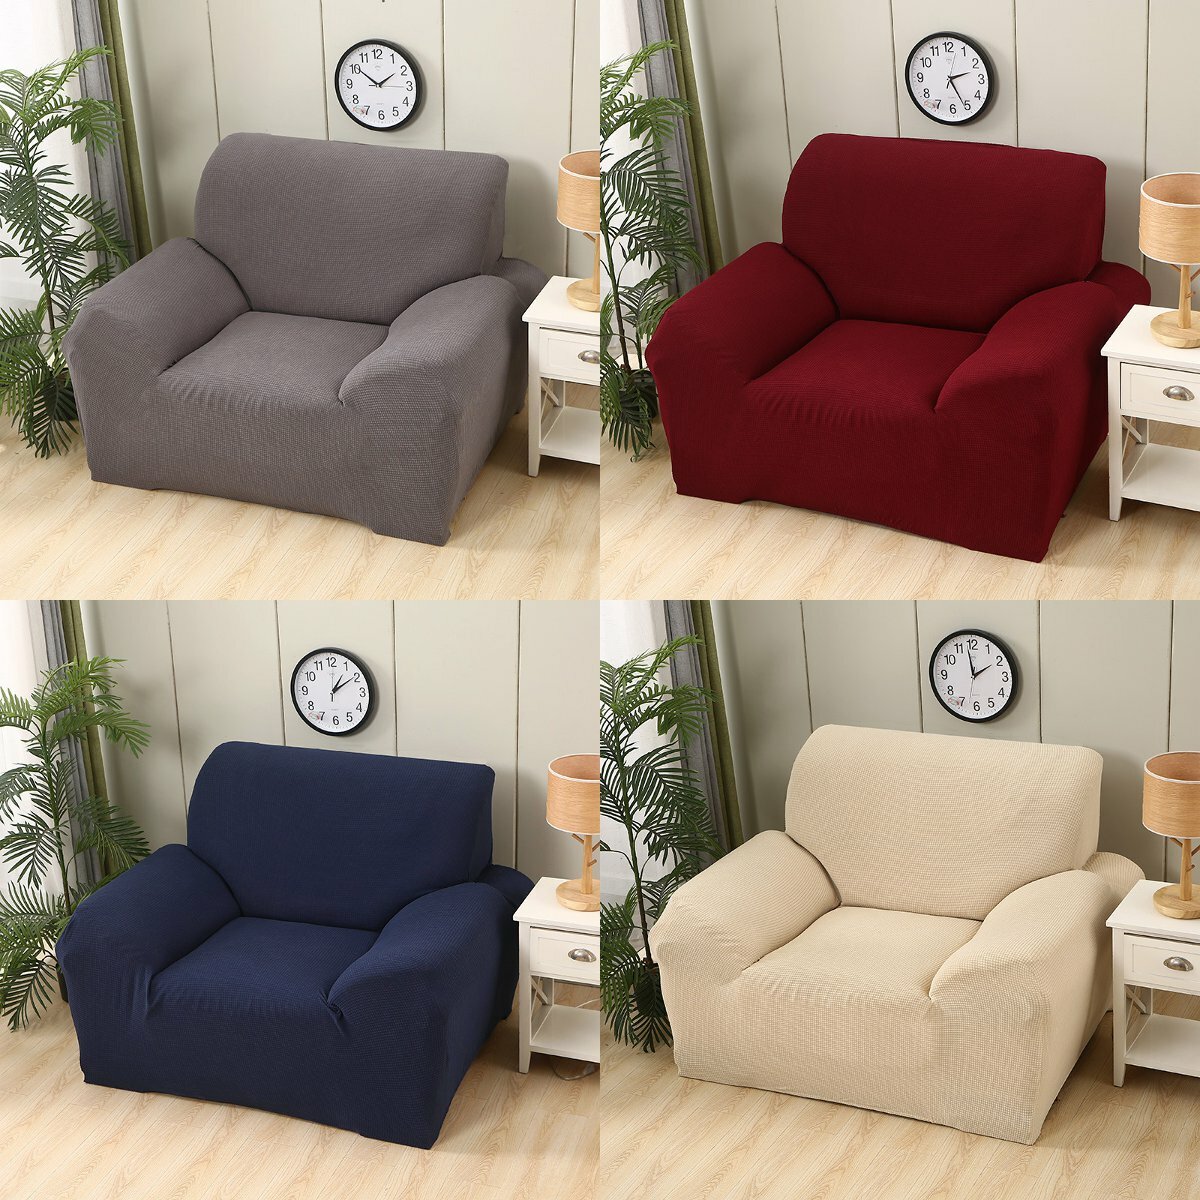 

Polyester Sofa Cover 1/2/3/4 Seater Thick Slipcover Couch Stretch Elastic Sofa Covers Home Living Room Sofa Supplies